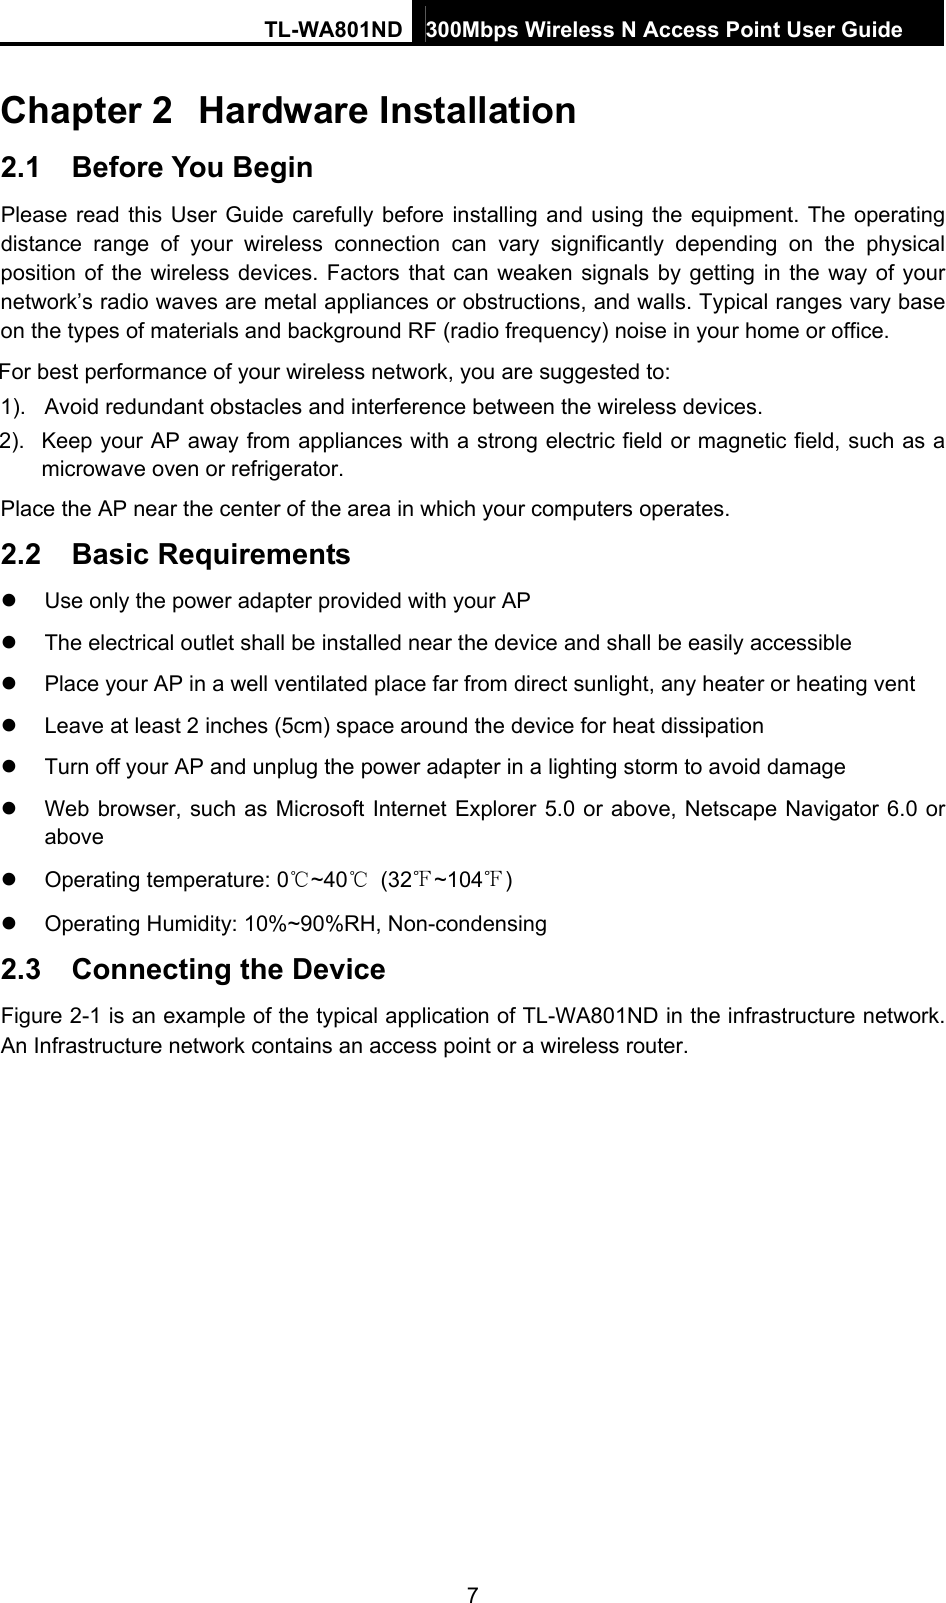 TL-WA801ND 300Mbps Wireless N Access Point User Guide  7 Chapter 2  Hardware Installation 2.1  Before You Begin Please read this User Guide carefully before installing and using the equipment. The operating distance range of your wireless connection can vary significantly depending on the physical position of the wireless devices. Factors that can weaken signals by getting in the way of your network’s radio waves are metal appliances or obstructions, and walls. Typical ranges vary base on the types of materials and background RF (radio frequency) noise in your home or office. For best performance of your wireless network, you are suggested to: 1).  Avoid redundant obstacles and interference between the wireless devices.   2).  Keep your AP away from appliances with a strong electric field or magnetic field, such as a microwave oven or refrigerator. Place the AP near the center of the area in which your computers operates. 2.2  Basic Requirements z  Use only the power adapter provided with your AP   z  The electrical outlet shall be installed near the device and shall be easily accessible z  Place your AP in a well ventilated place far from direct sunlight, any heater or heating vent z  Leave at least 2 inches (5cm) space around the device for heat dissipation z  Turn off your AP and unplug the power adapter in a lighting storm to avoid damage z  Web browser, such as Microsoft Internet Explorer 5.0 or above, Netscape Navigator 6.0 or above z  Operating temperature: 0℃~40℃ (32℉~104℉) z  Operating Humidity: 10%~90%RH, Non-condensing 2.3  Connecting the Device Figure 2-1 is an example of the typical application of TL-WA801ND in the infrastructure network. An Infrastructure network contains an access point or a wireless router.  